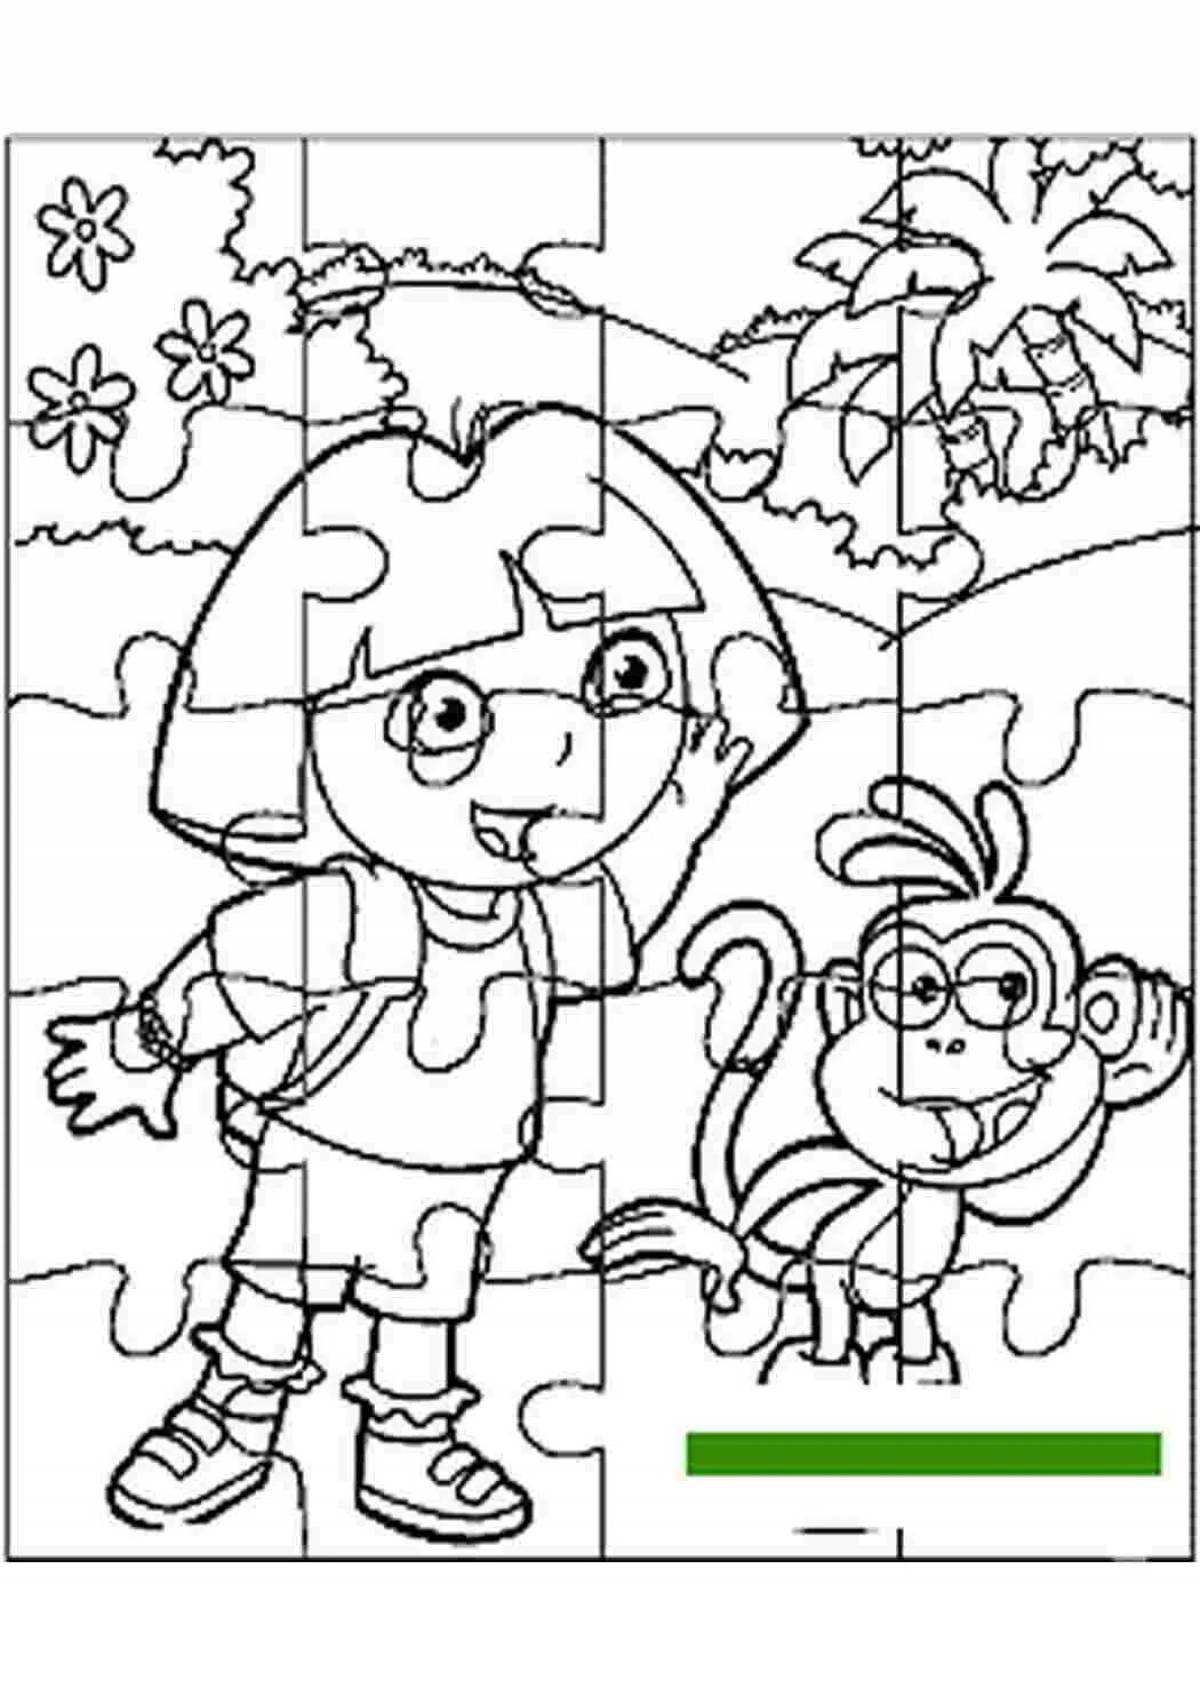 Unforgettable coloring in games for children 5 years old puzzles